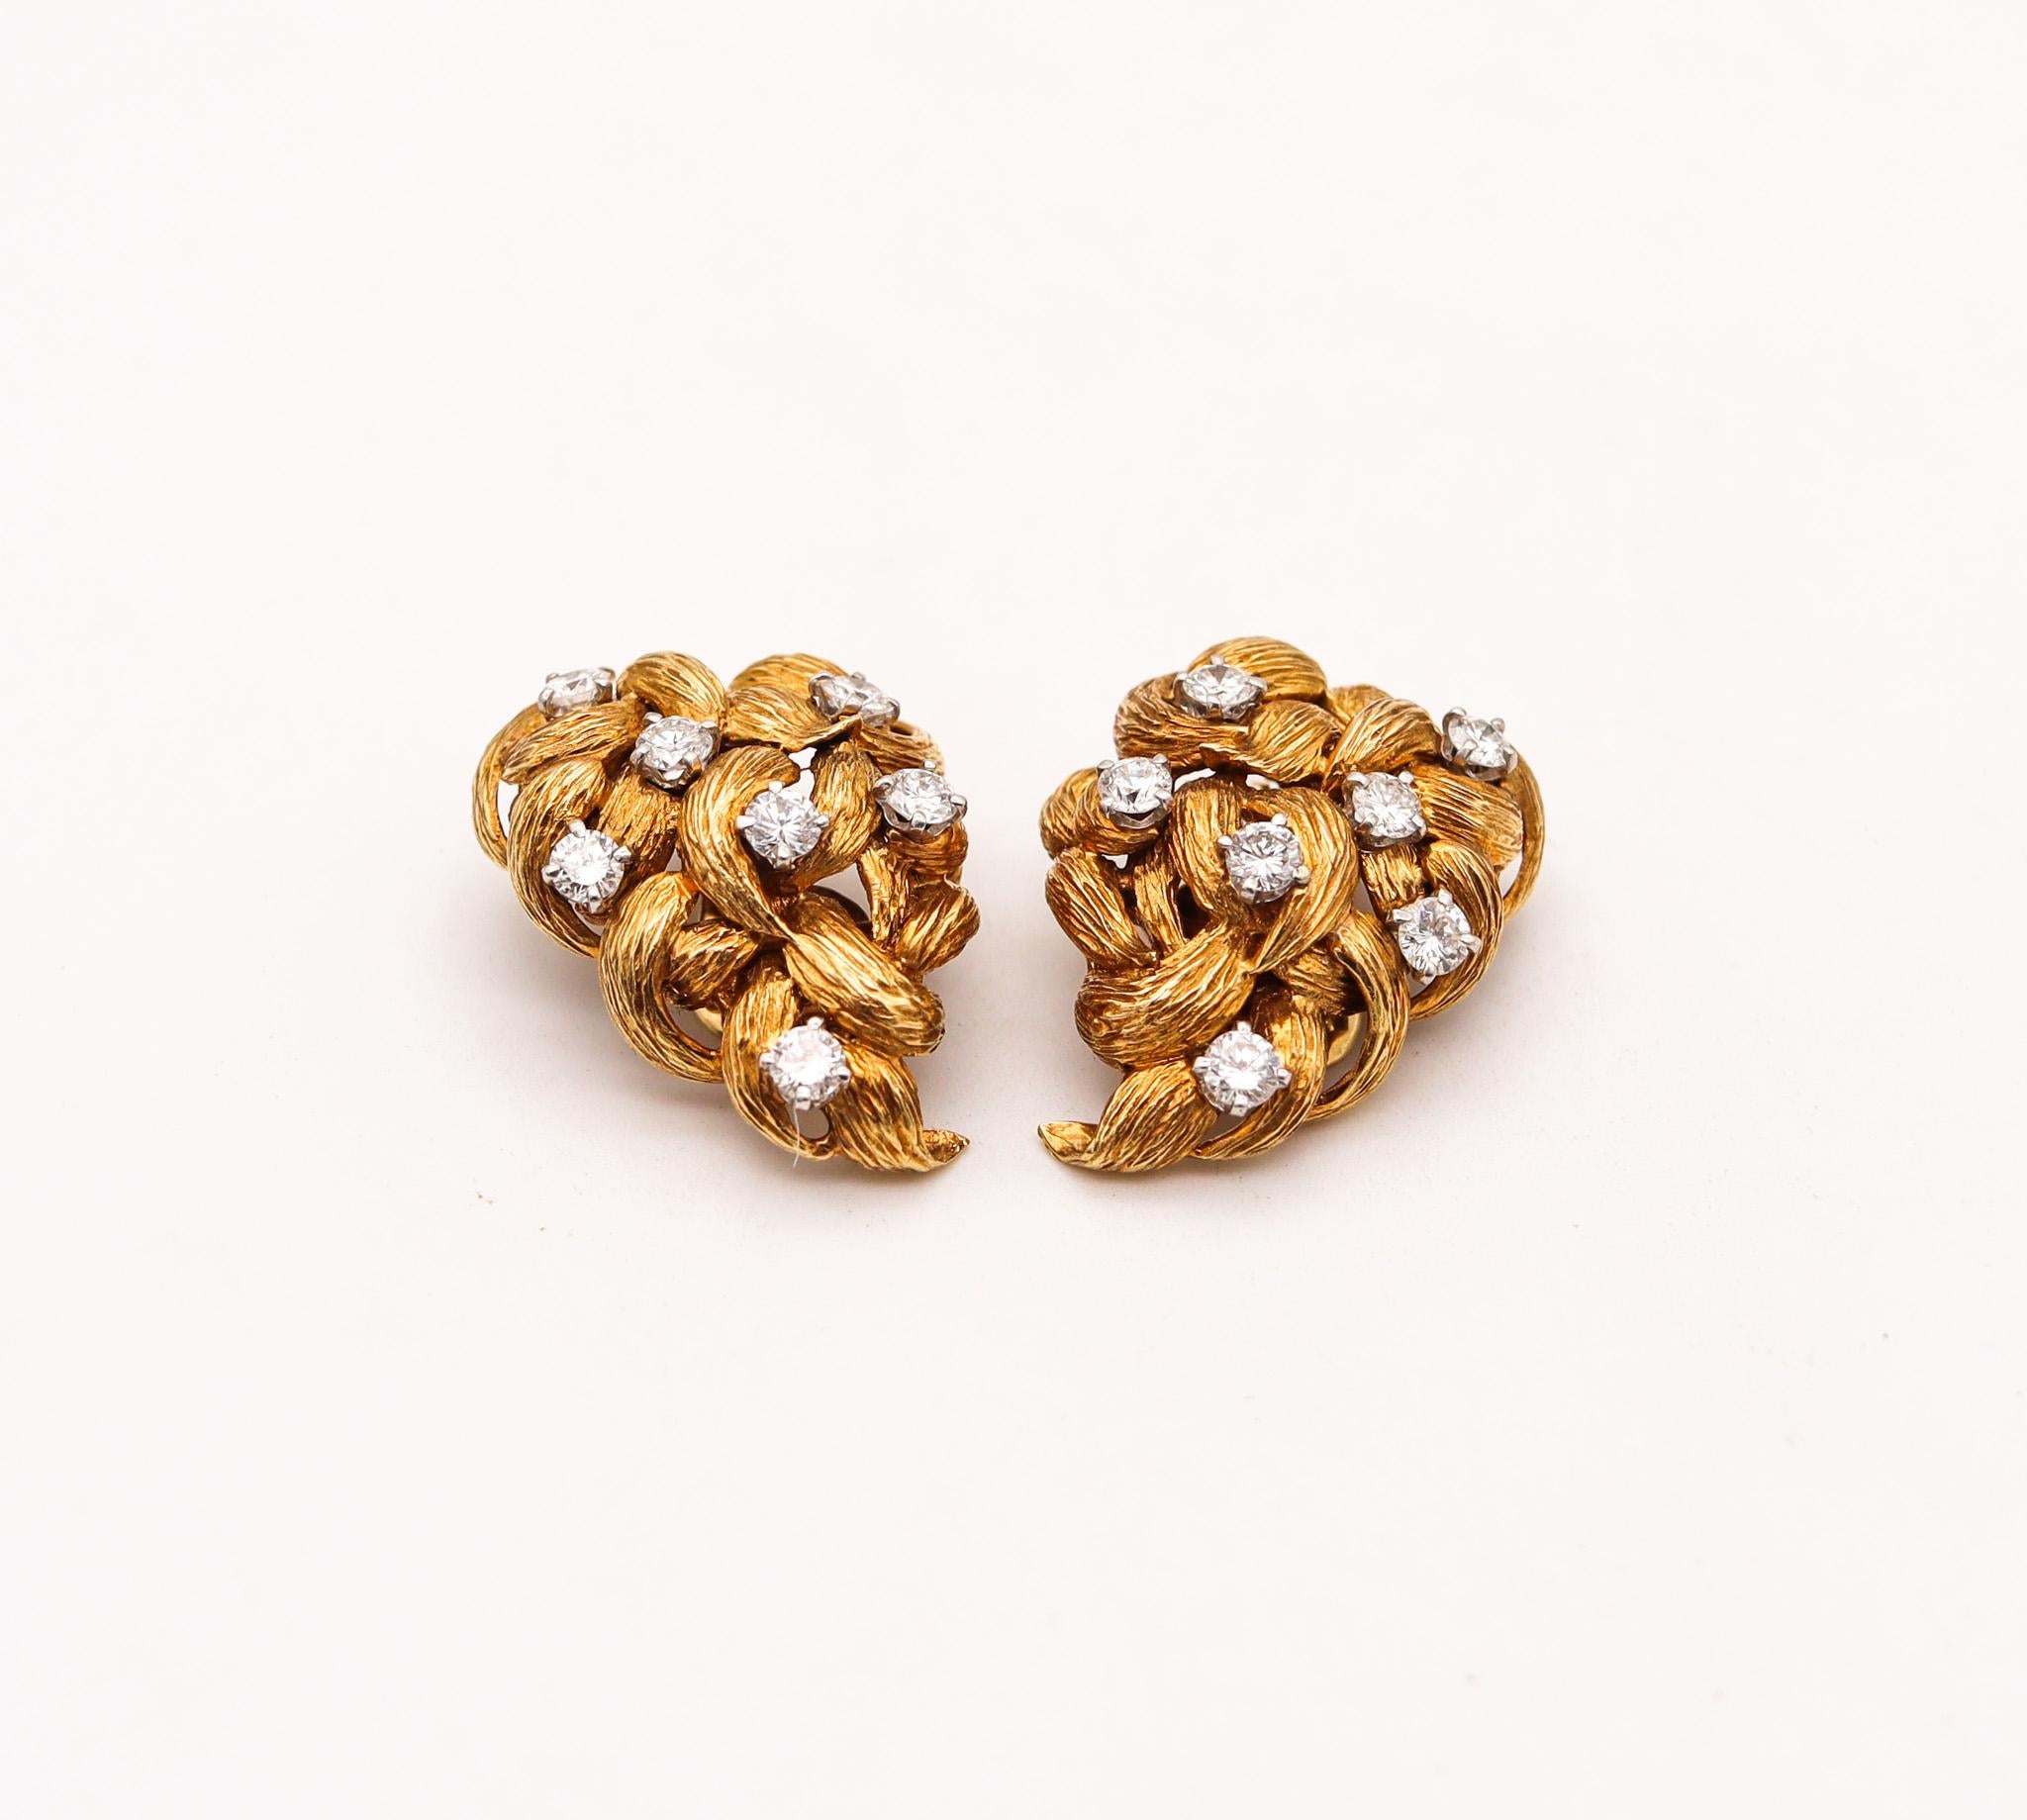 Door knocker earrings designed by David Webb (1925-1975).

Beautiful American classic pair, created in New York City at the jewelry atelier of David Webb during the mid-20th Century period, back in the 1960. These clips-on earrings has been crafted